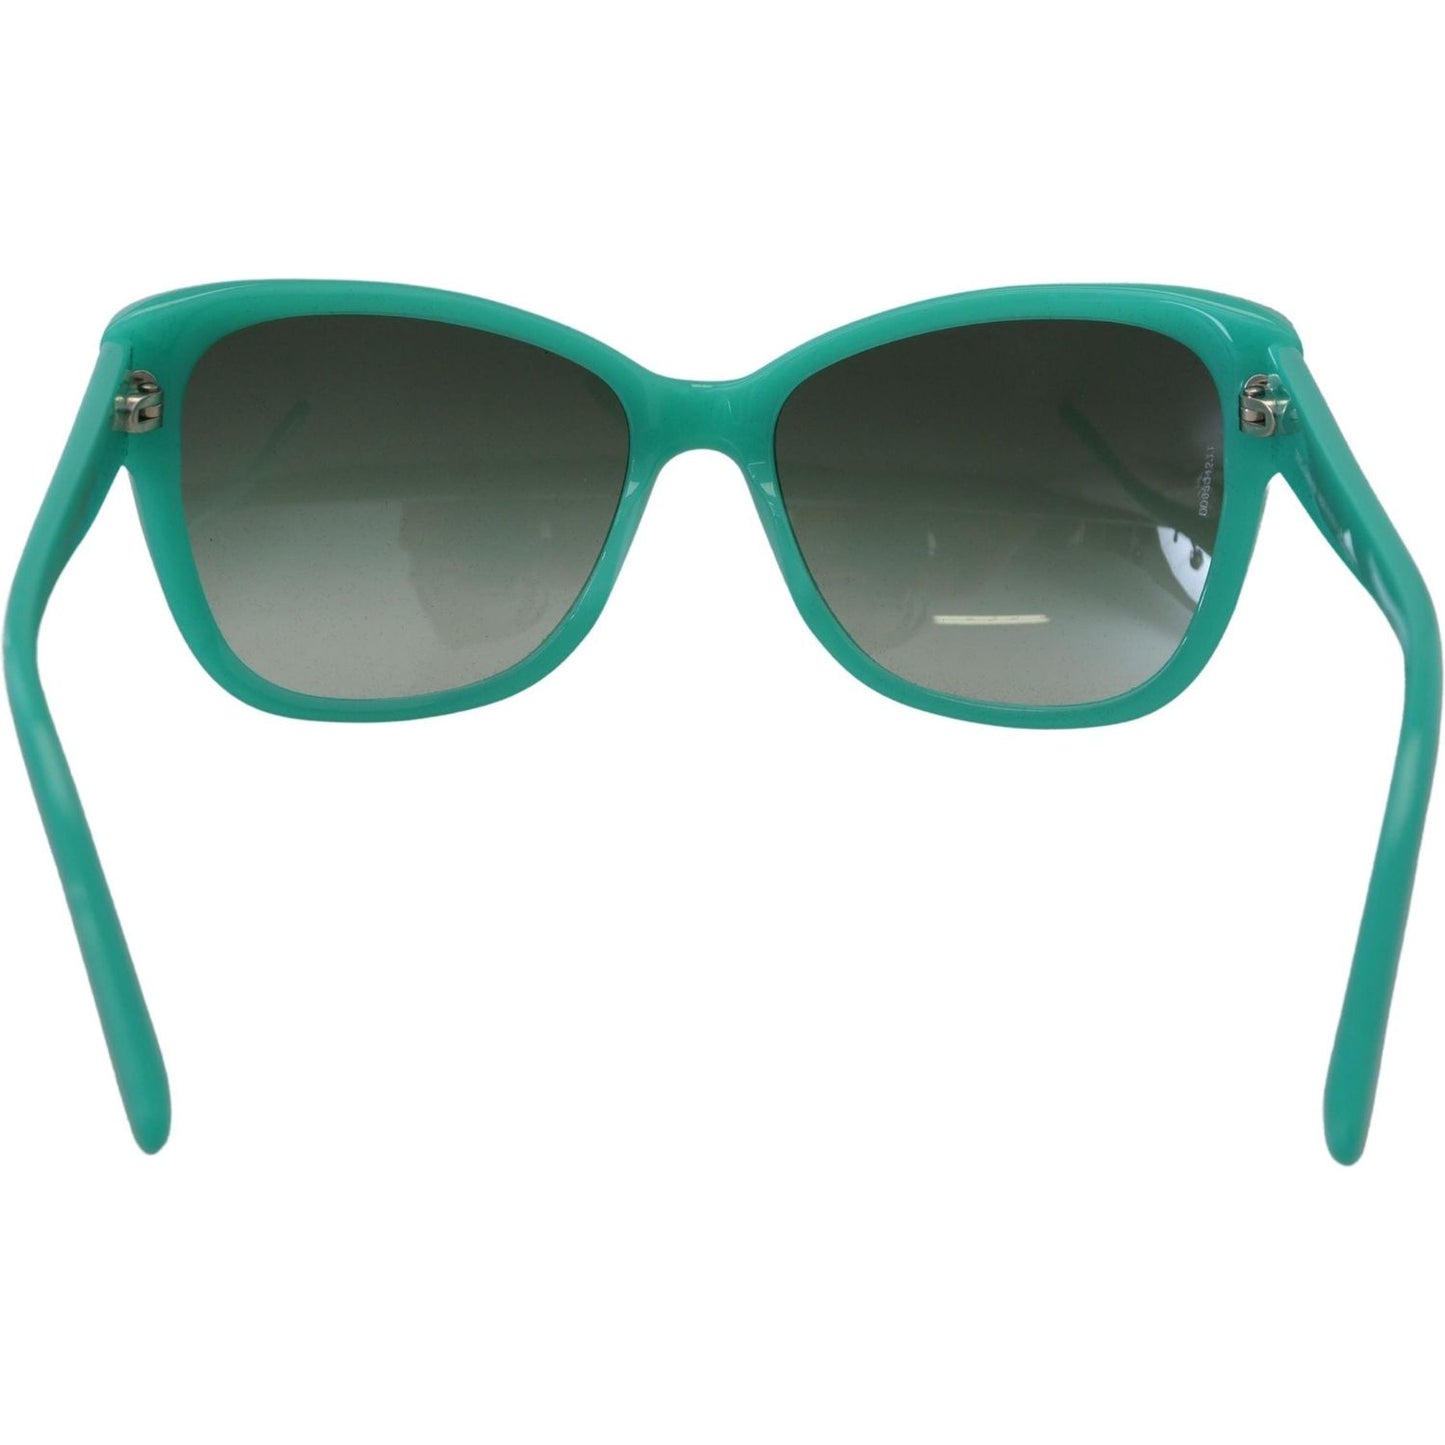 Dolce & Gabbana Enigmatic Star-Patterned Square Sunglasses green-stars-acetate-square-shades-dg4124-sunglasses IMG_4012-scaled-cad77d32-595.jpg